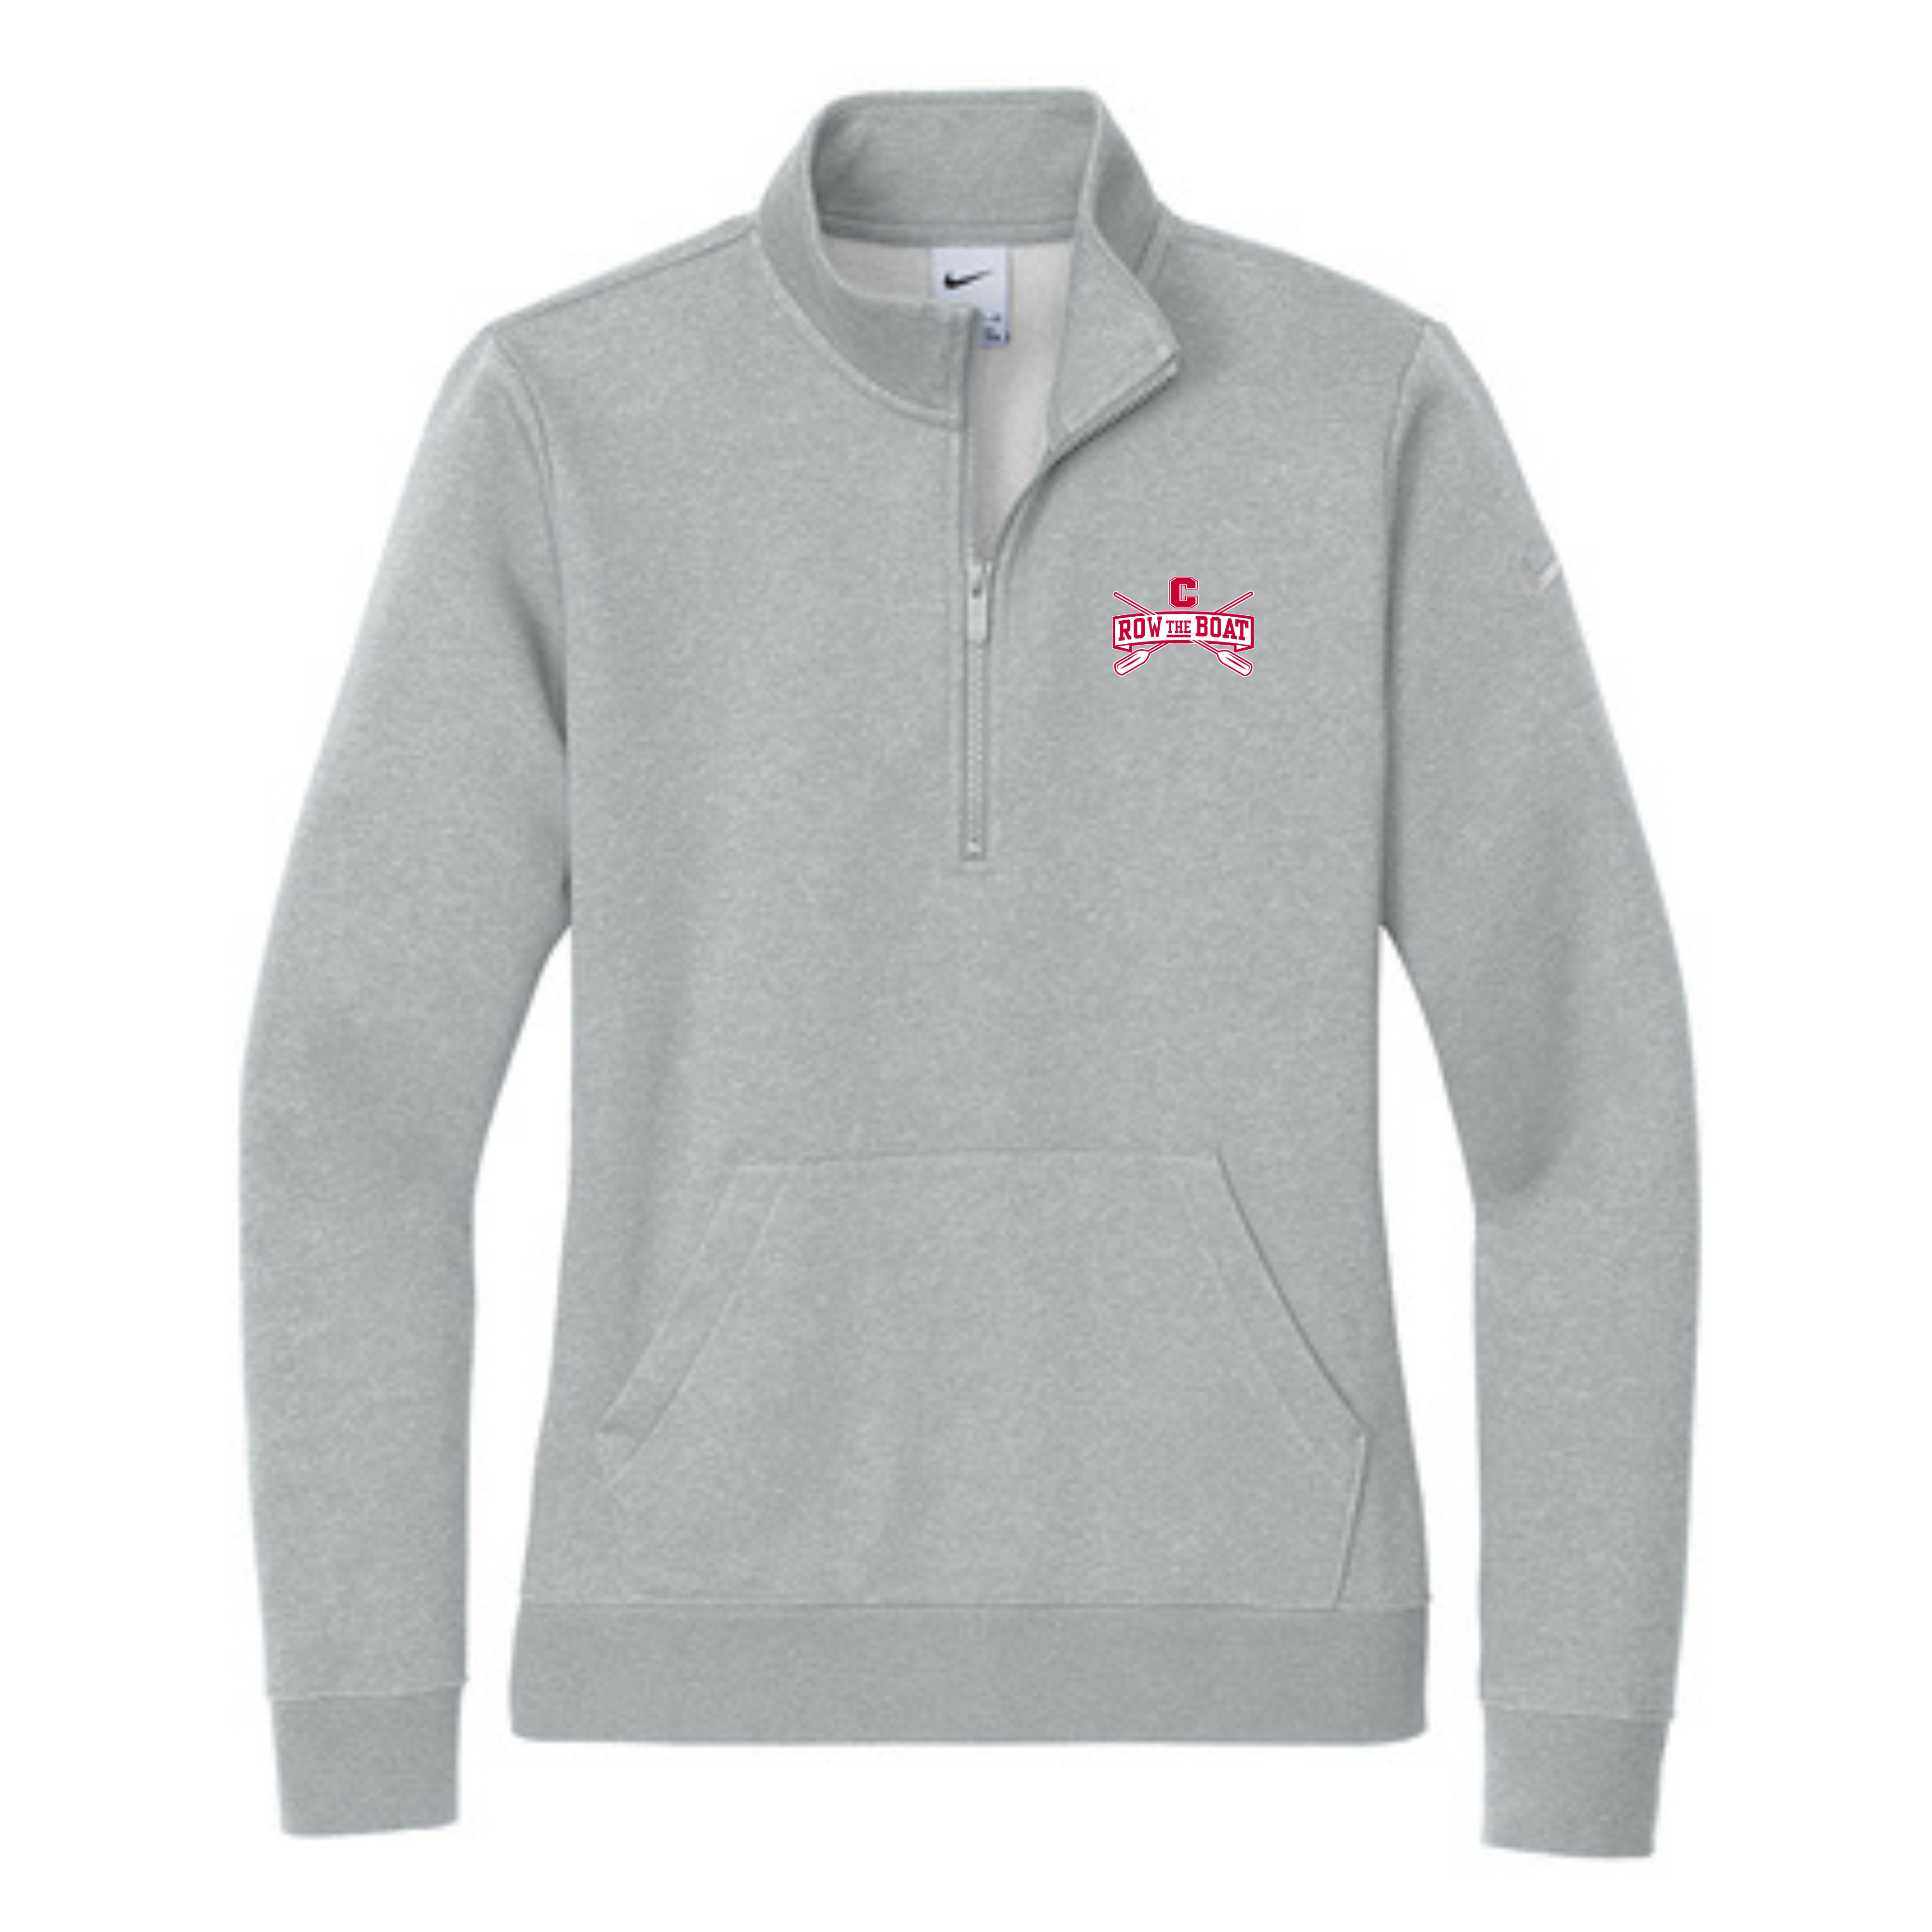 Central Row the Boat Women's Nike Pullover- NKDX6720